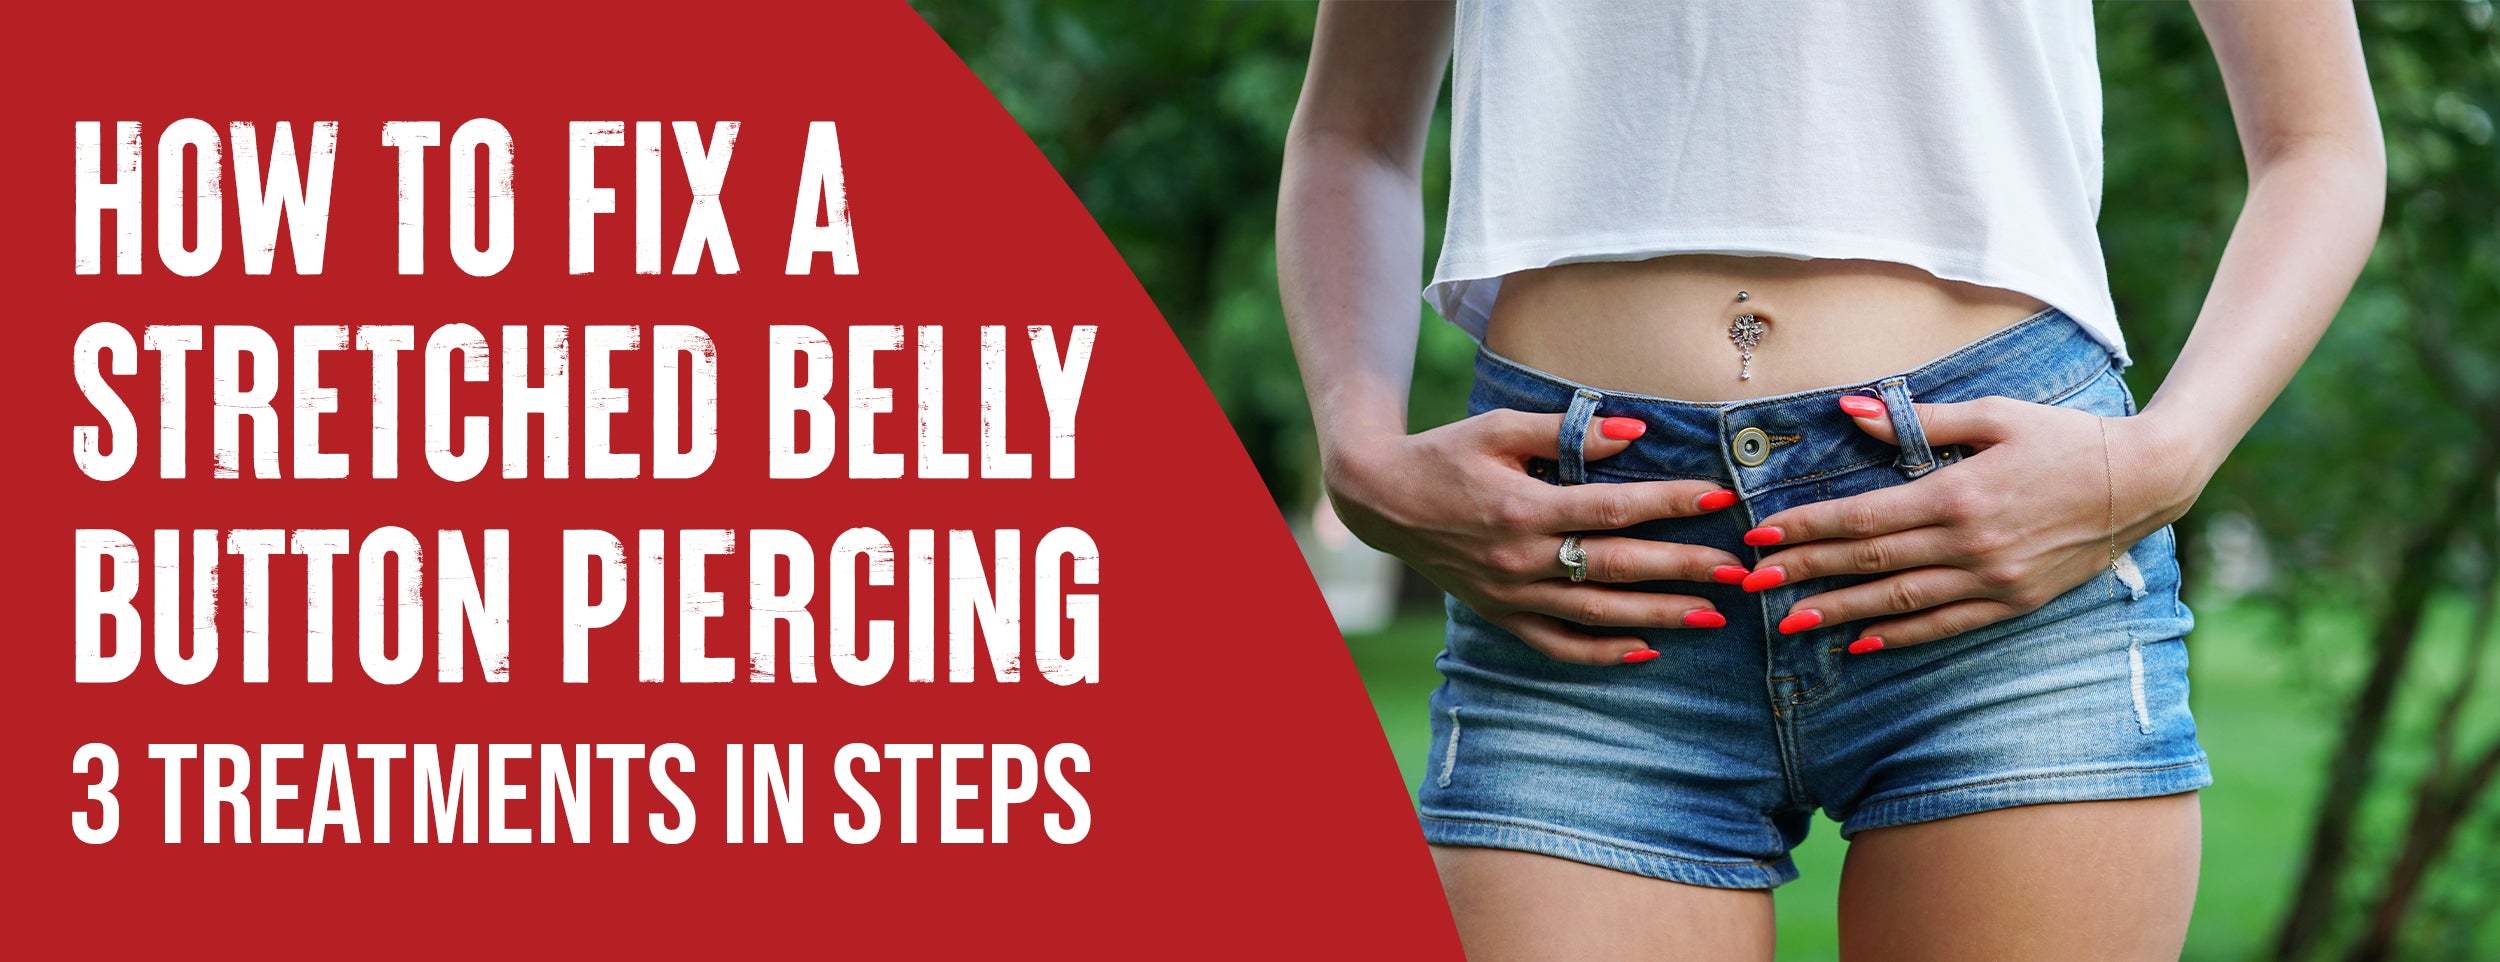 Treatment Options & Step-by-Step Guide for Stretched Belly Button Piercings